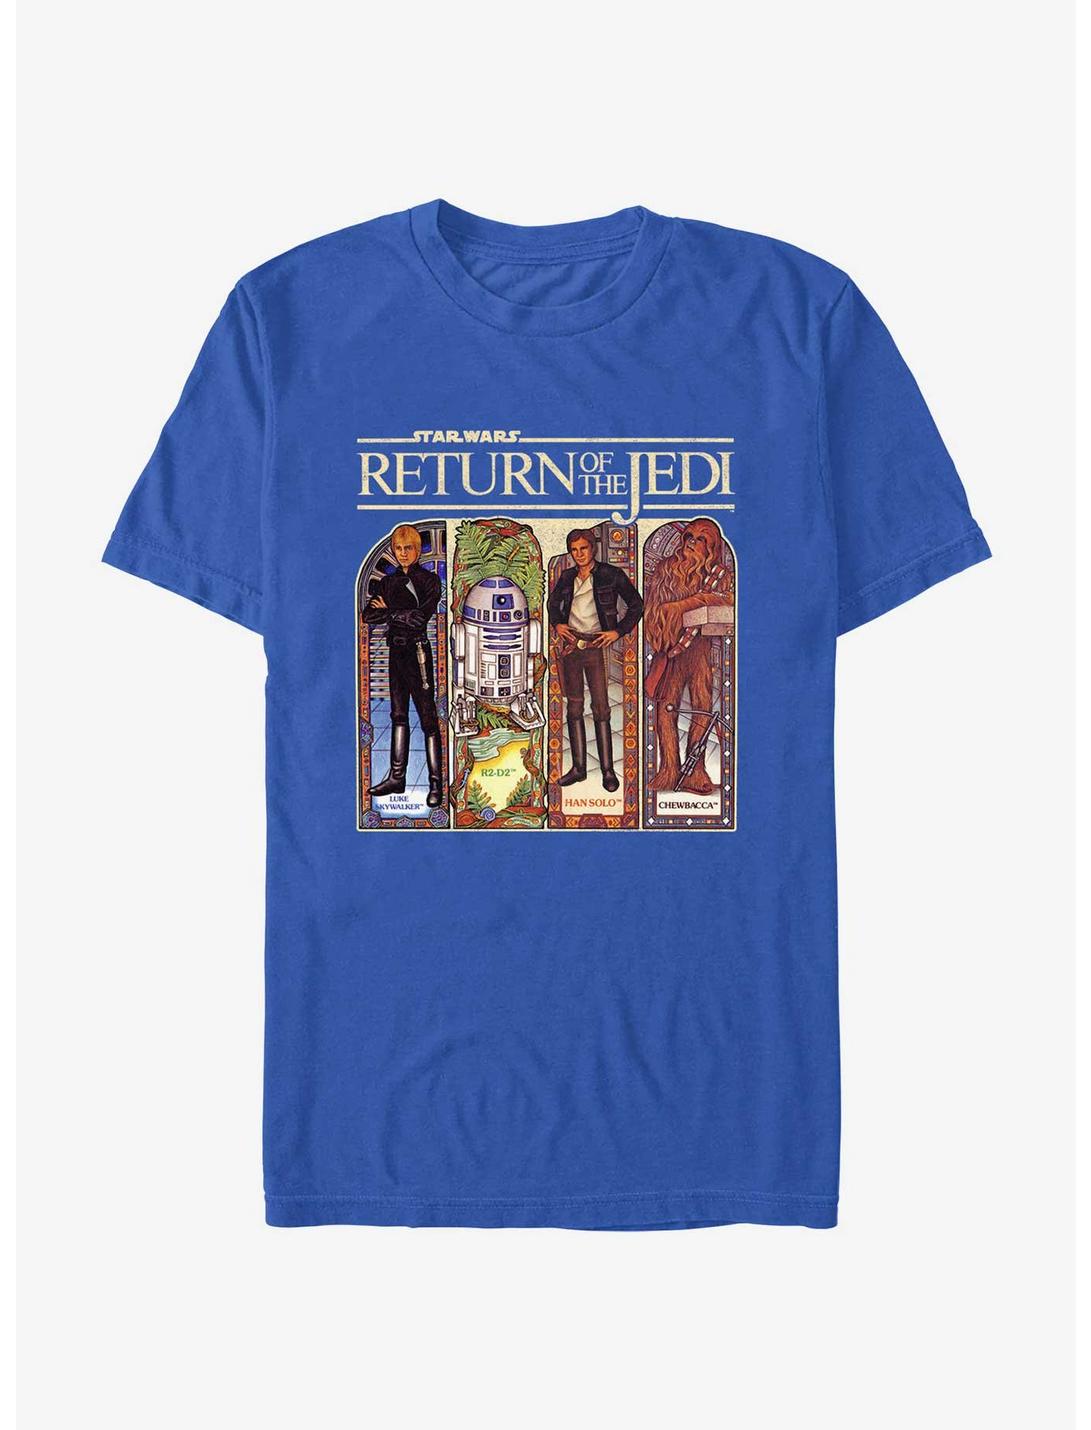 Star Wars Return Of The Jedi Stained Glass Characters T-Shirt, ROYAL, hi-res